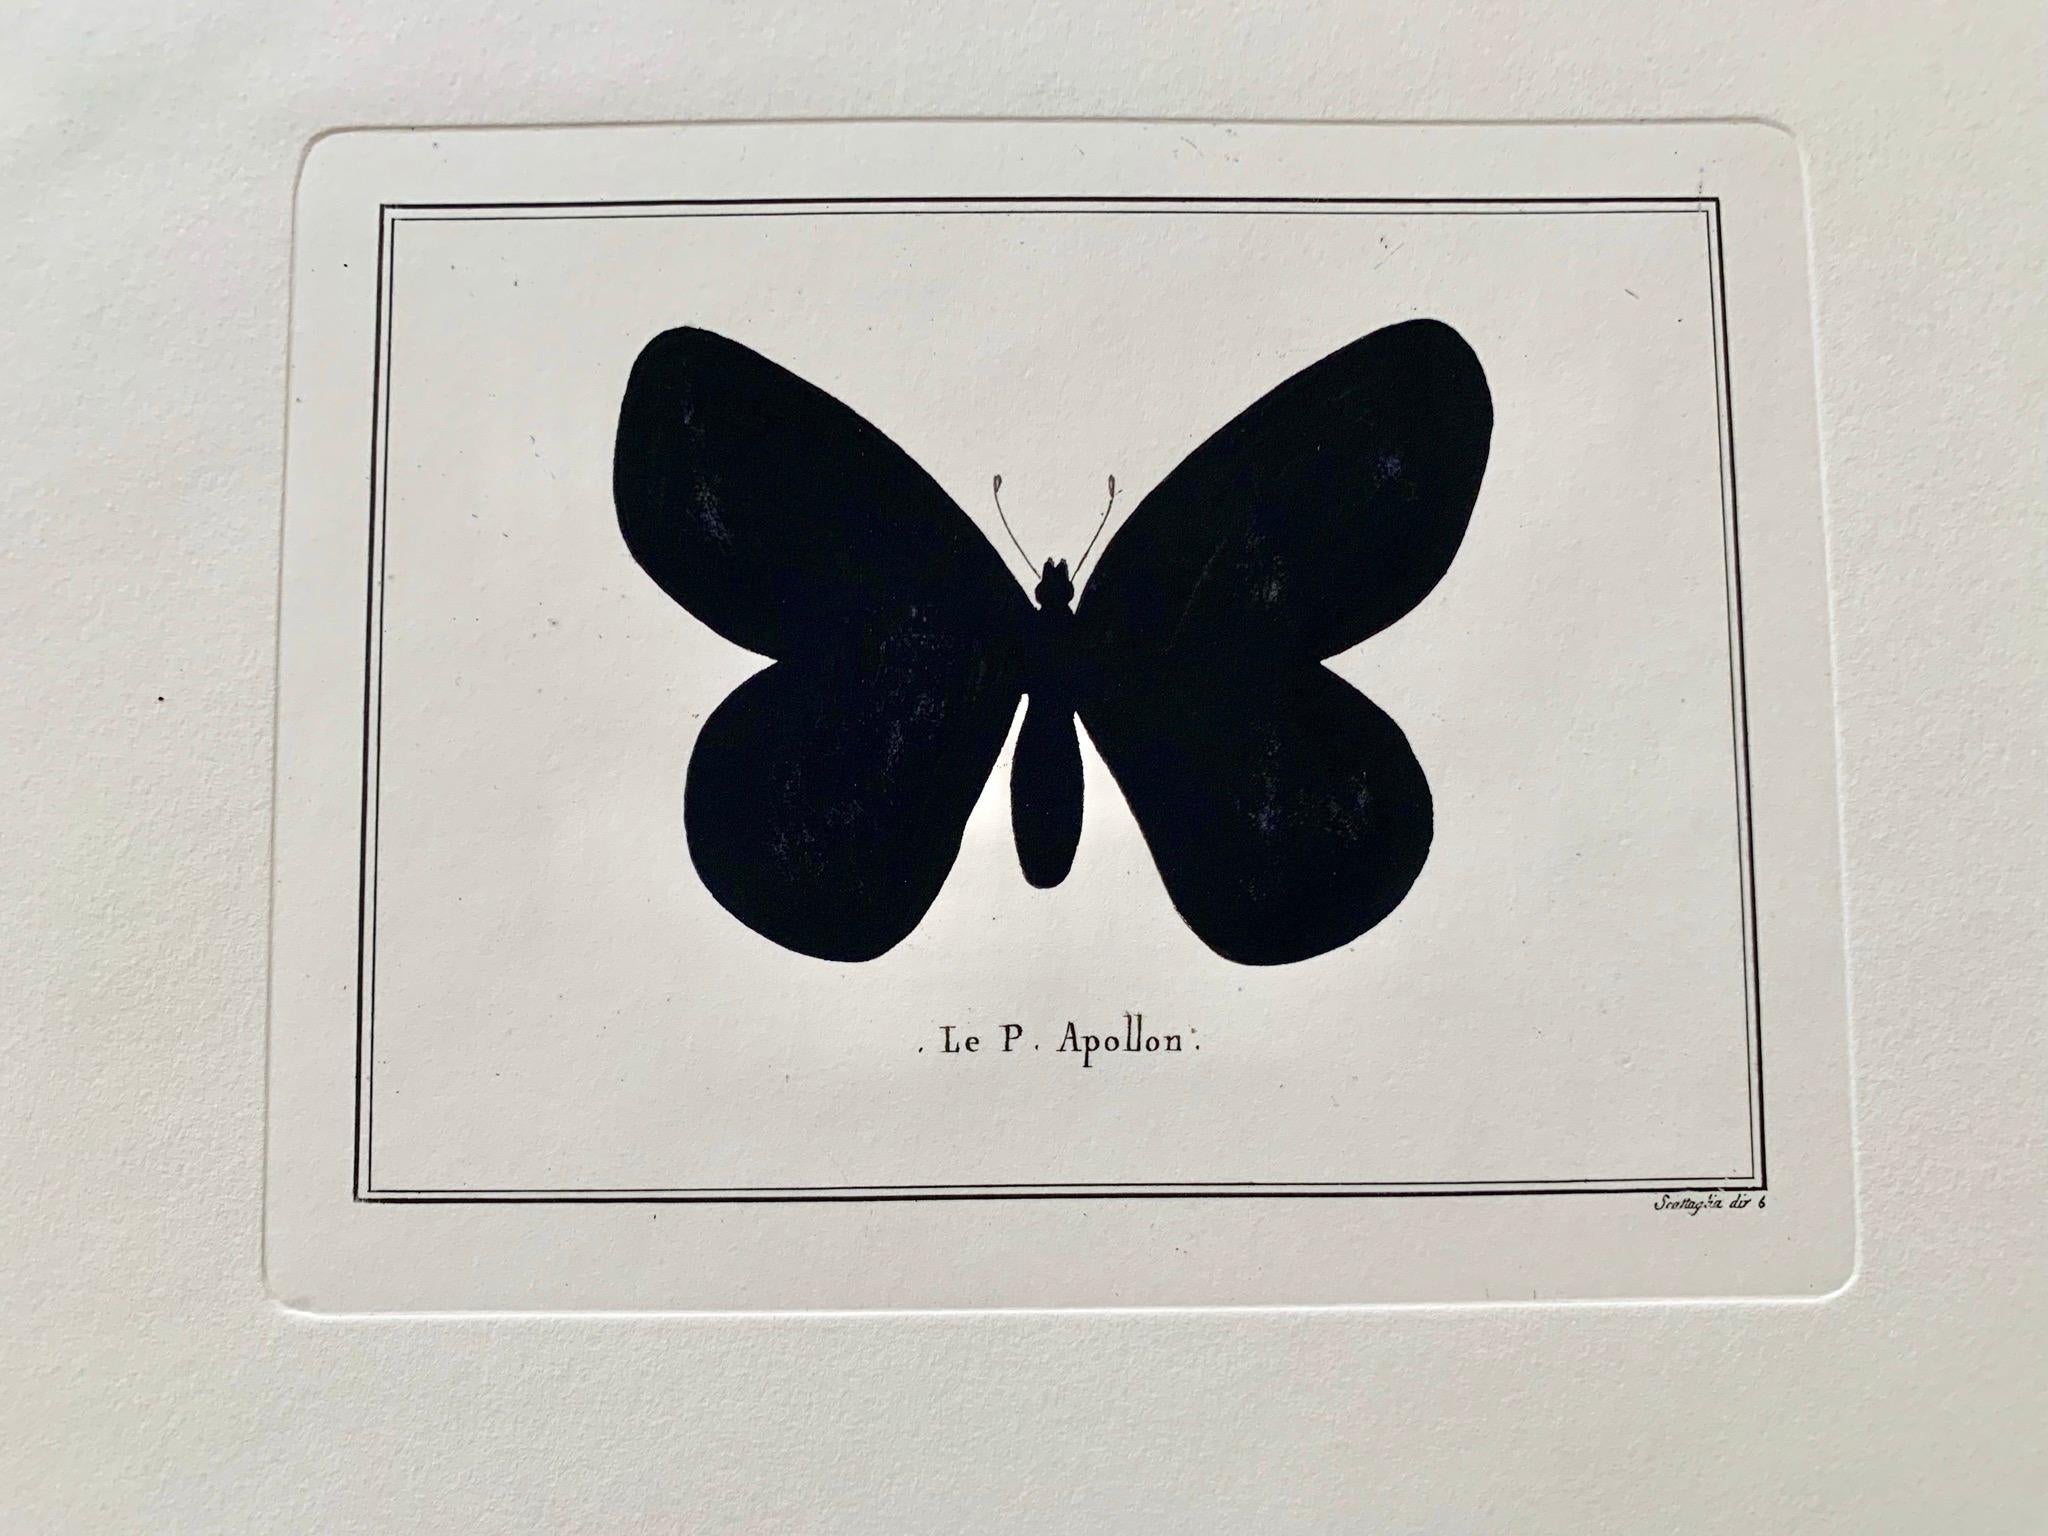 Artistic decorative hand watercolored print representing a butterfly.
This print has been pressed with an ancient press called 